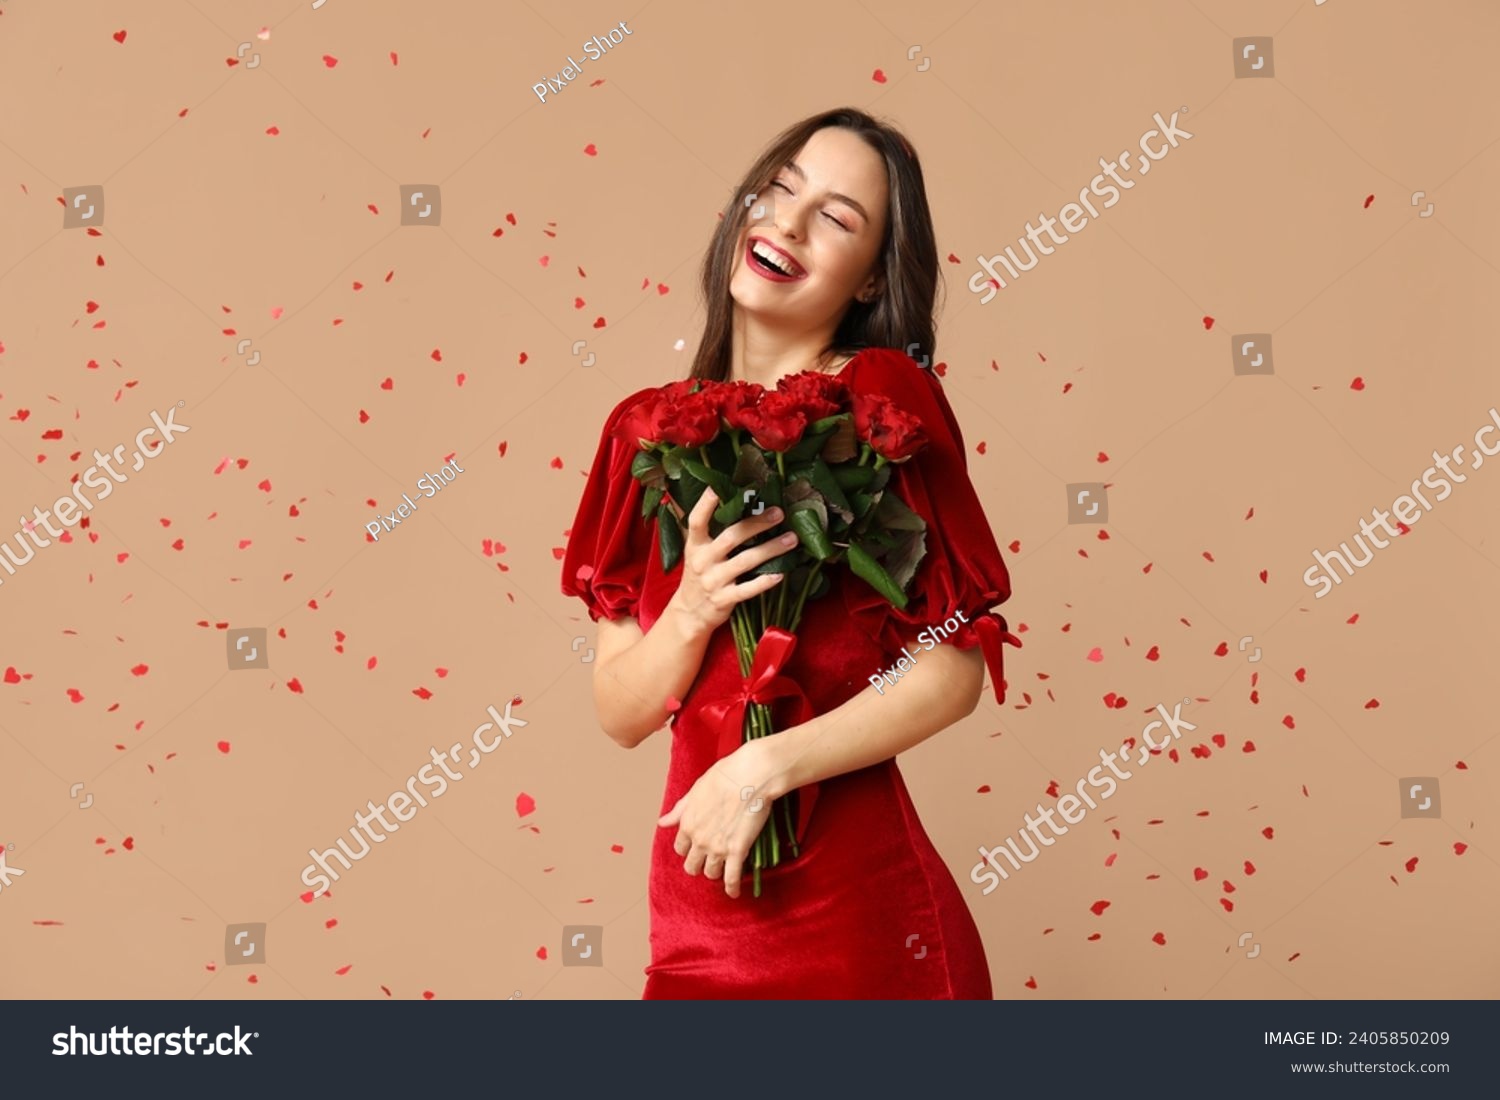 Beautiful young woman with bouquet of red roses and confetti on brown background. Valentine's Day celebration #2405850209